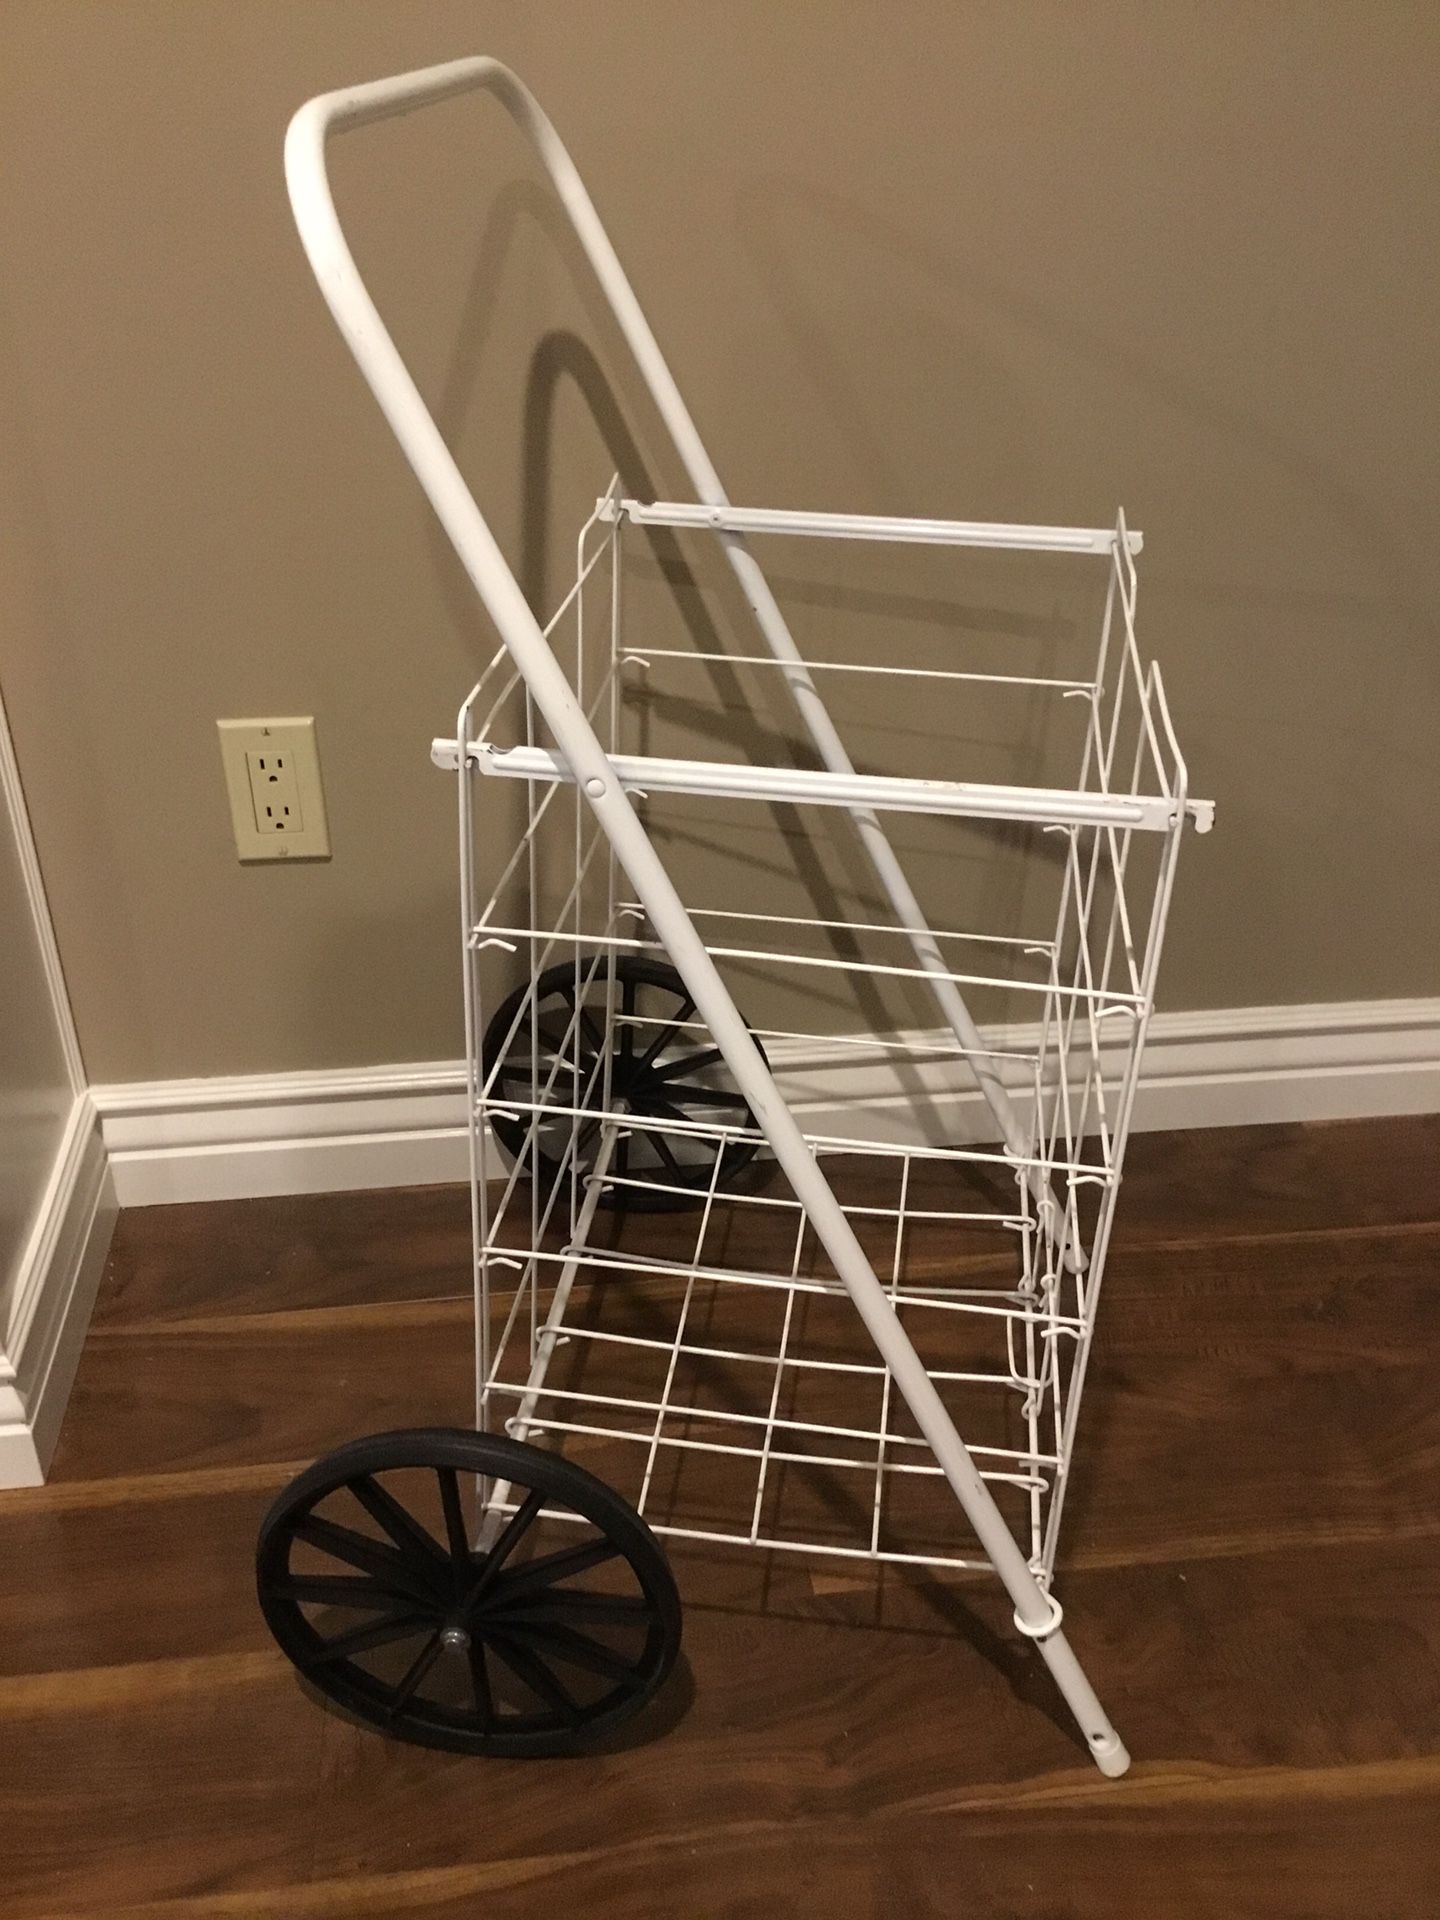 Collapsible Tote / Shopping / Utility Cart